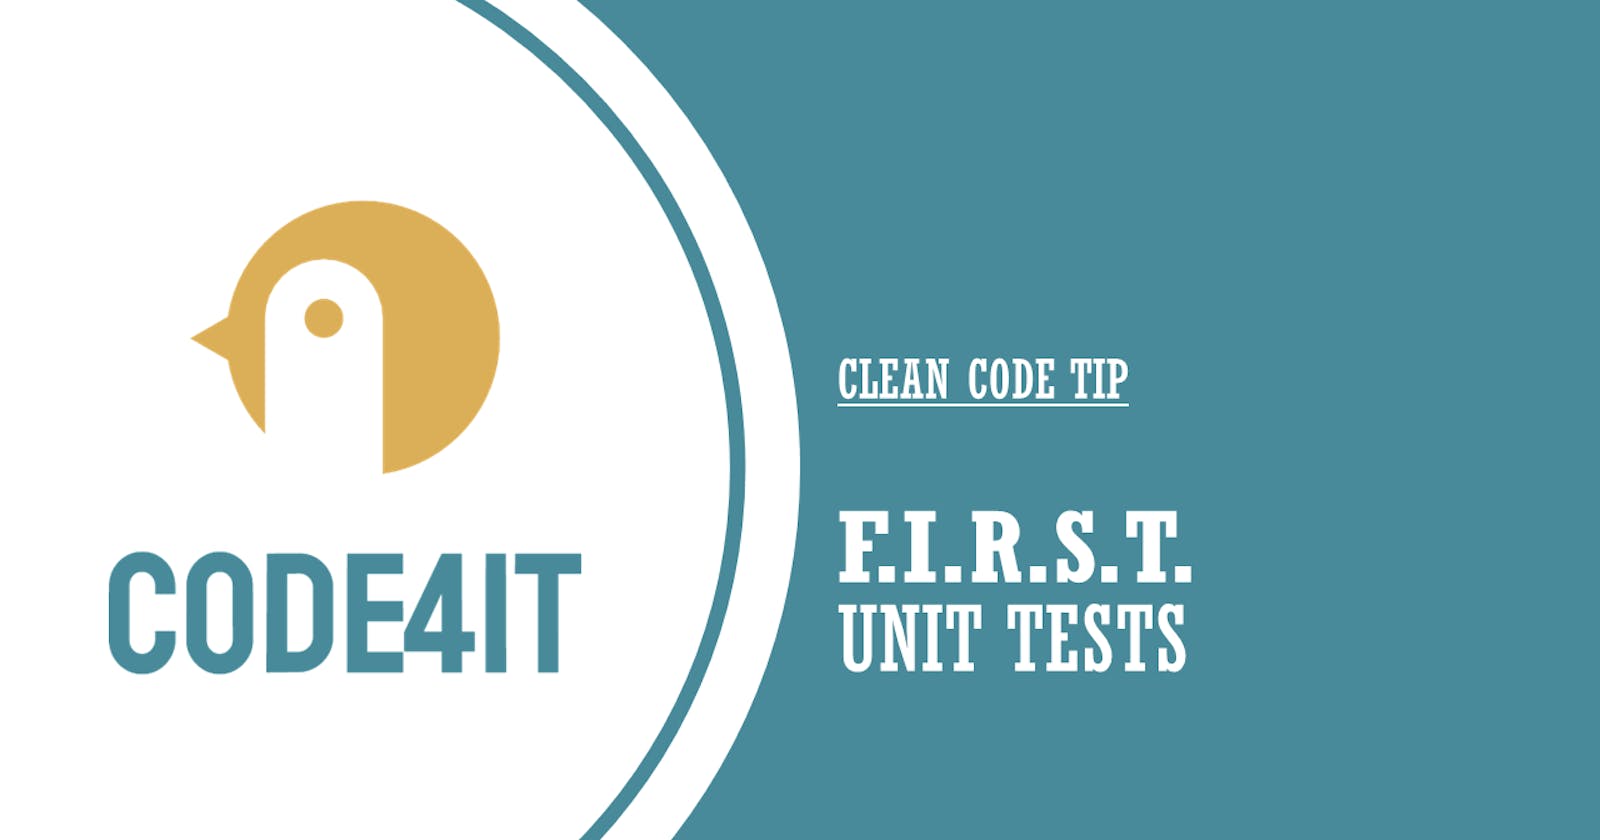 Clean Code Tip: F.I.R.S.T. acronym for better unit tests